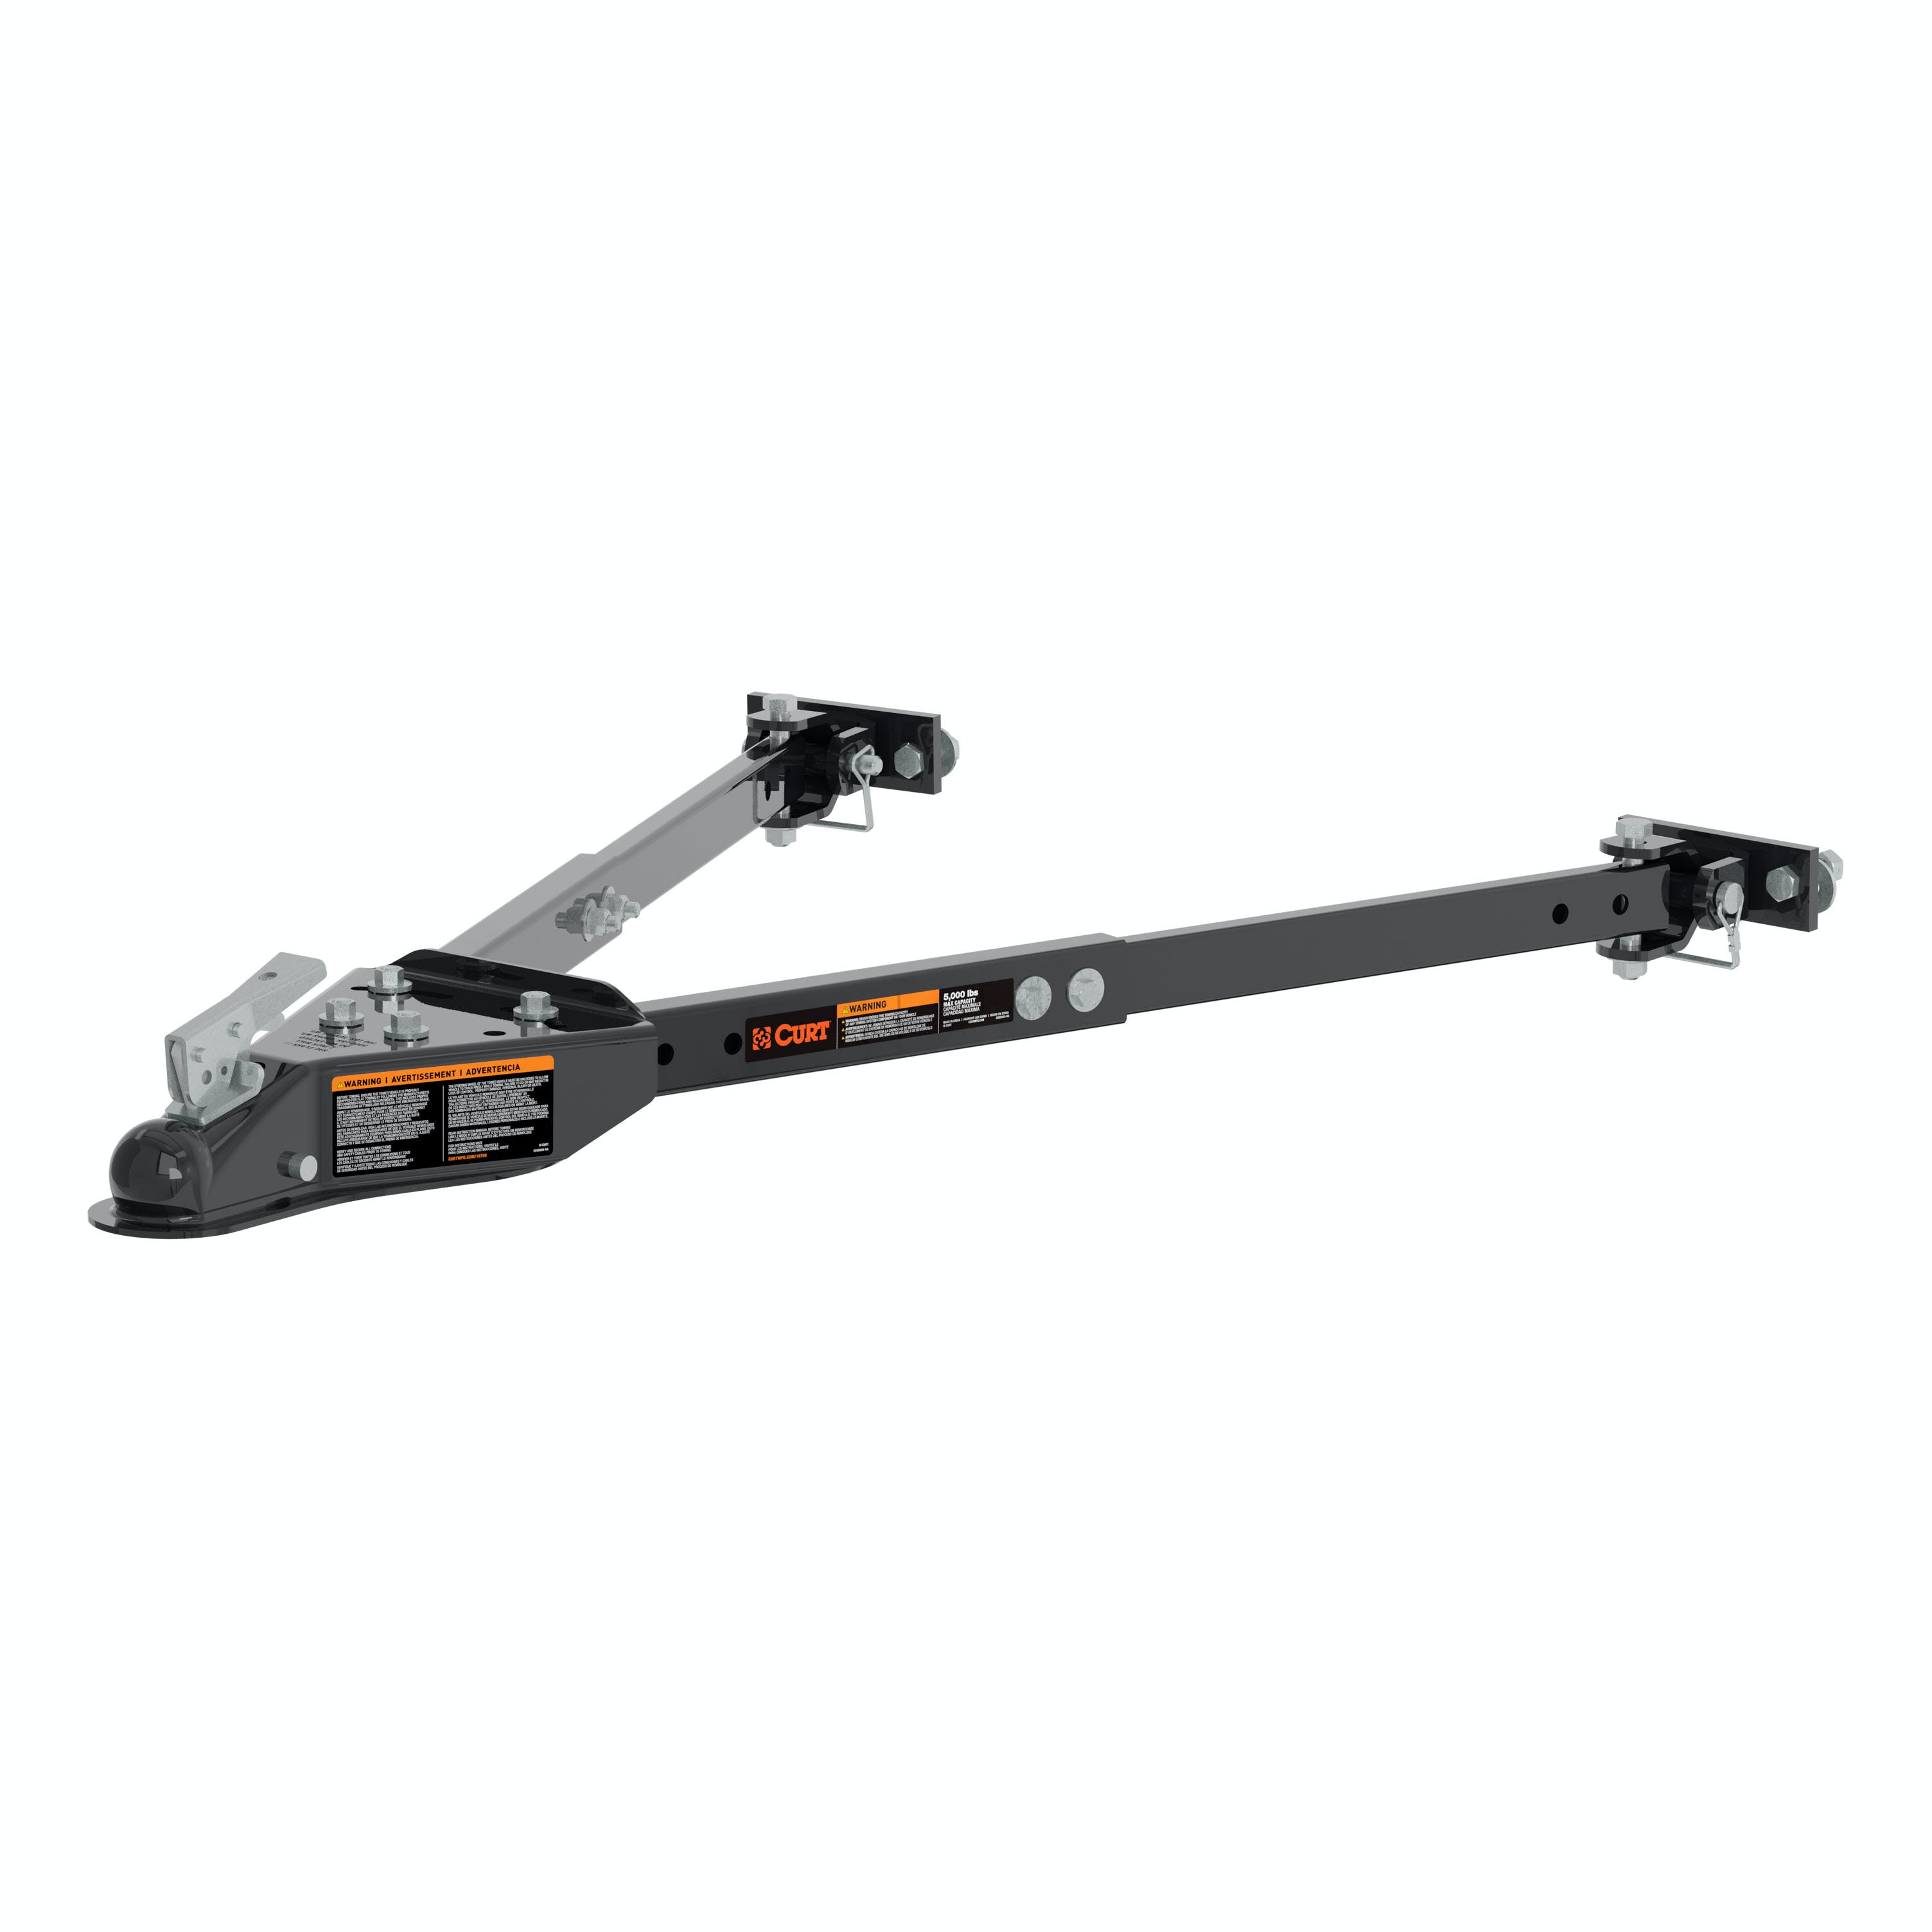 CURT 19750 Universal Tow Bar with 2" Coupler, 5,000 lbs, Adjusts 26" to 40"